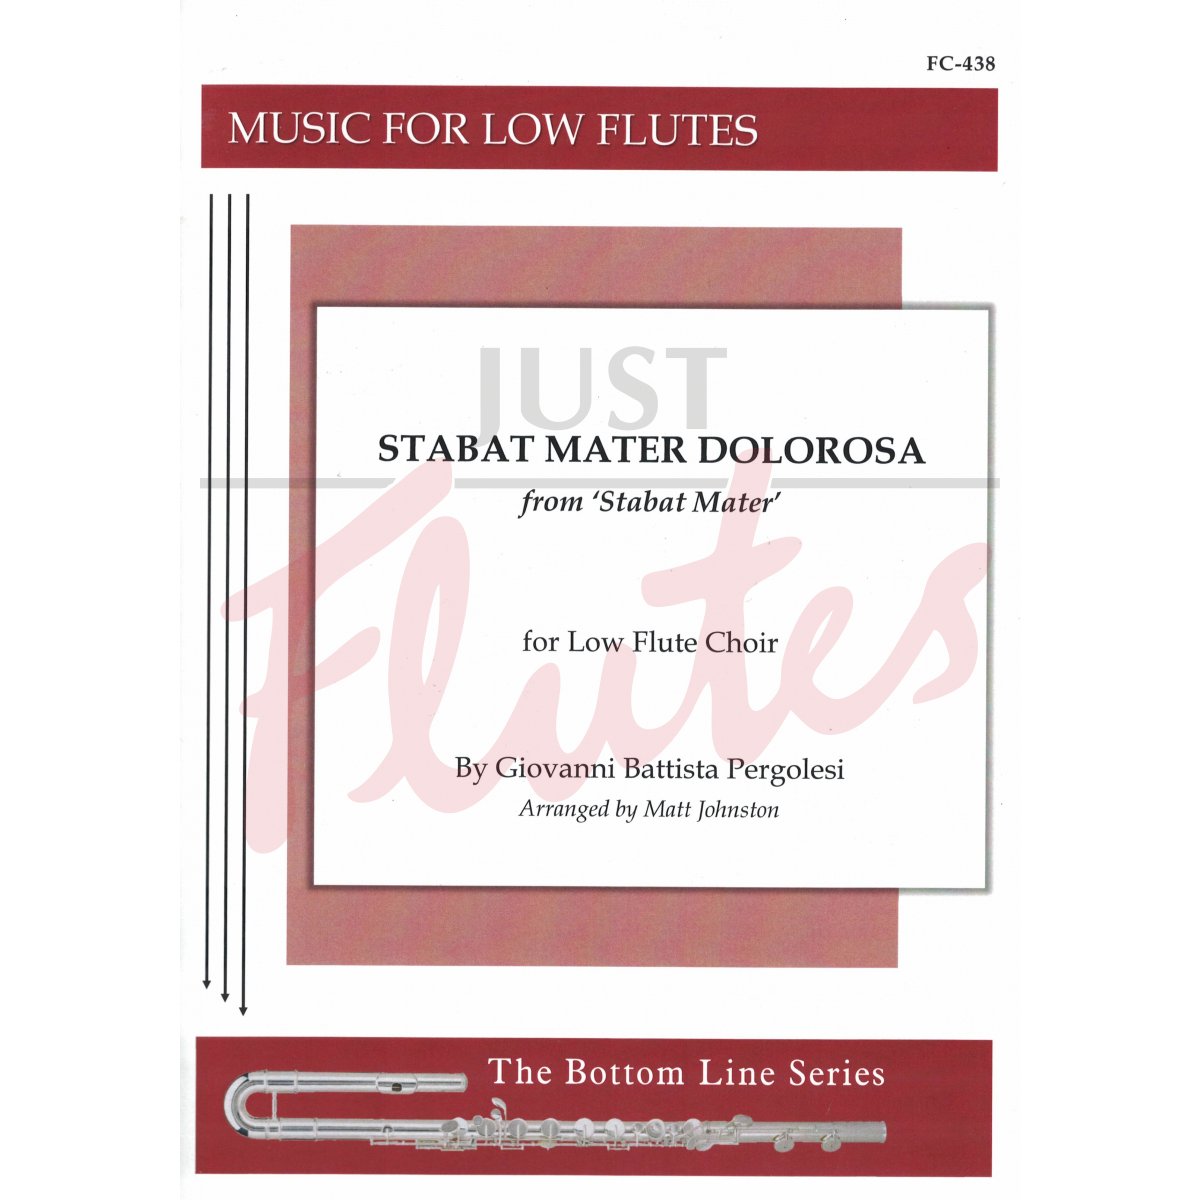 Stabat Mater Dolorosa - from Stabat Mater for Low Flute Choir